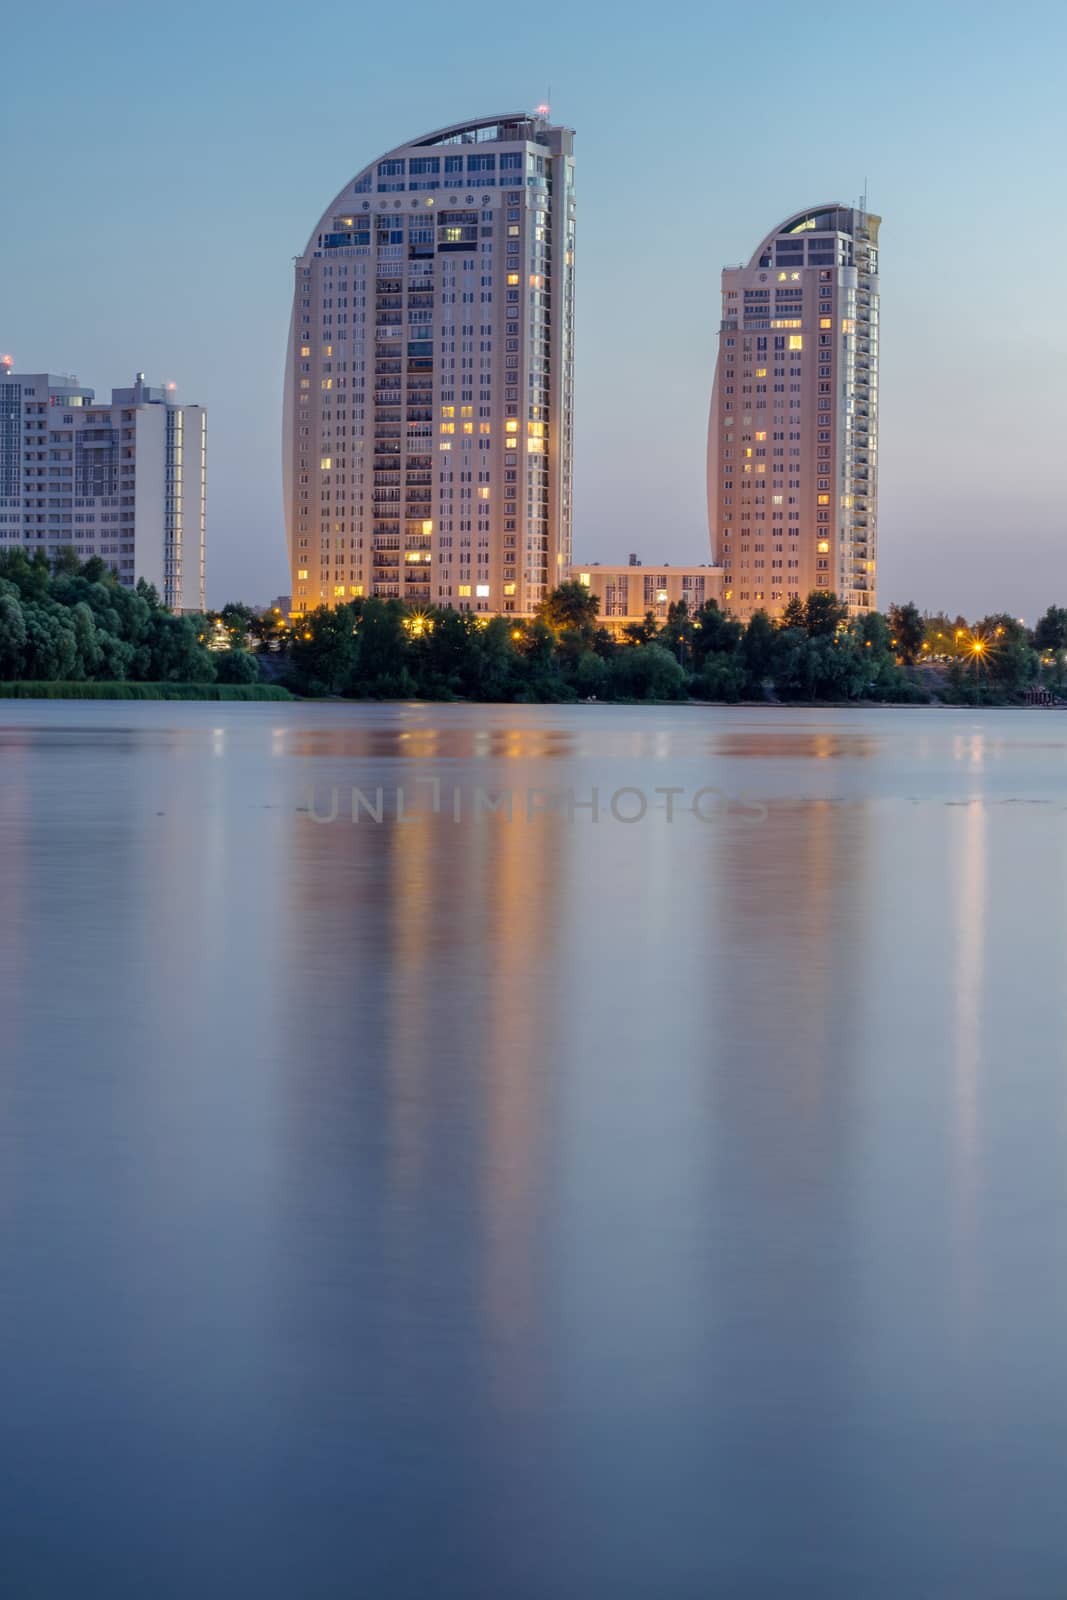 Night city buildings reflected in river water. HDR